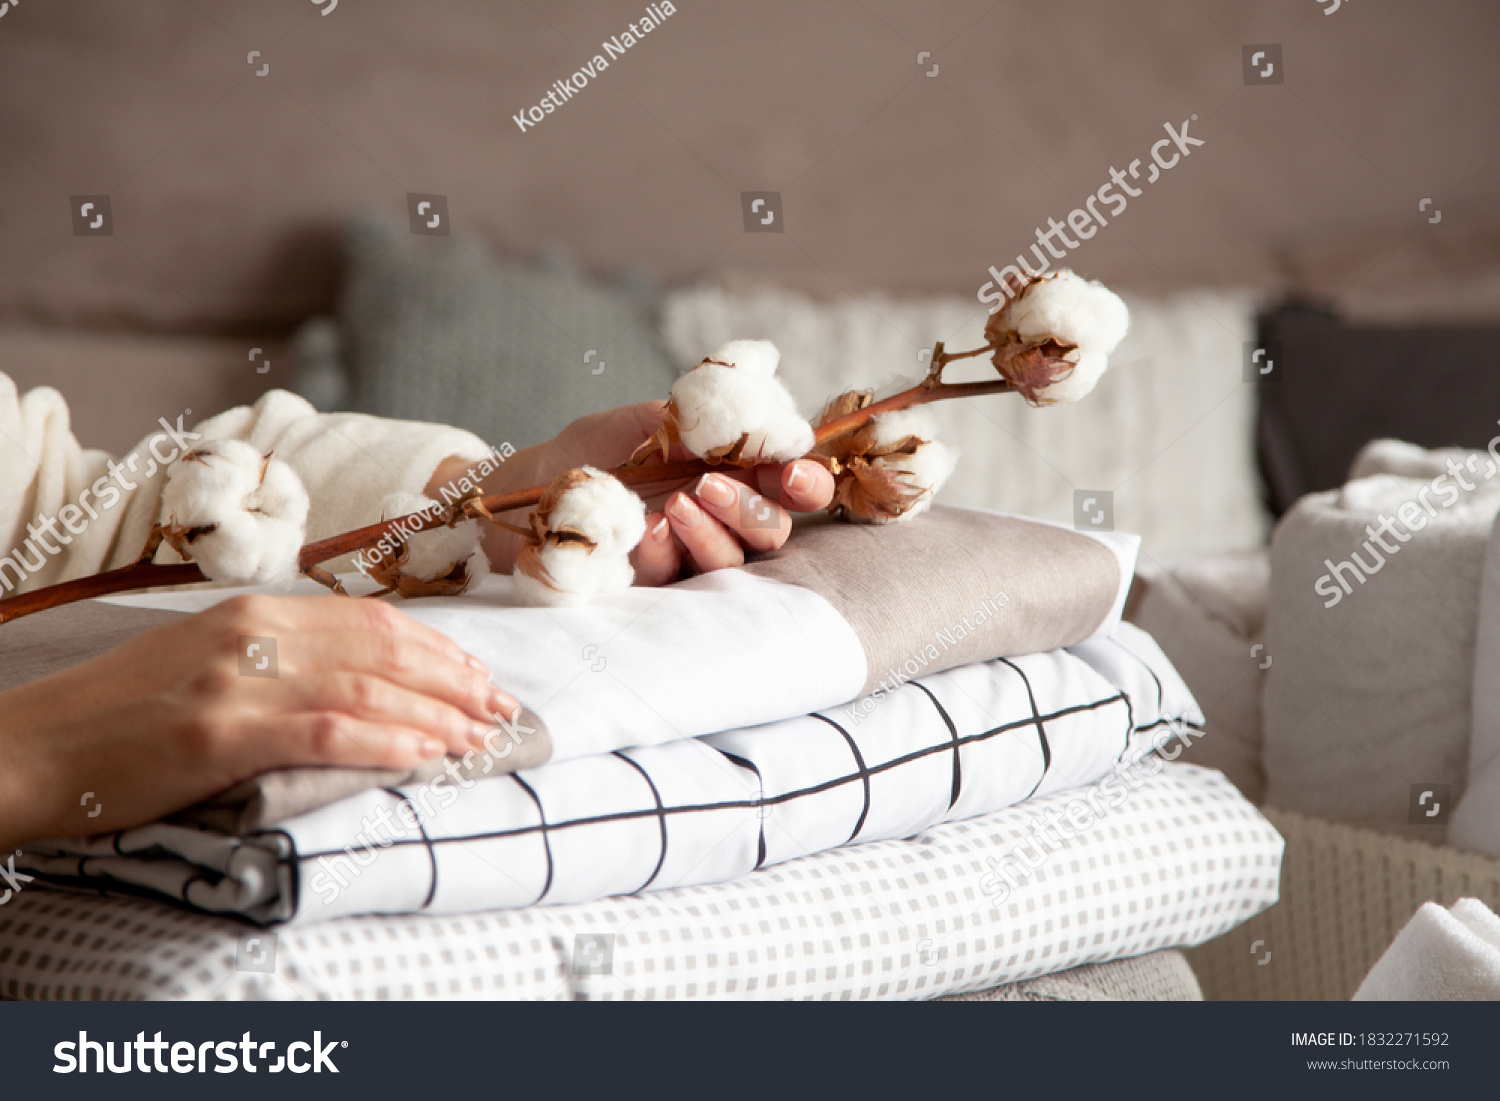 Well groomed woman hands holding the cotton branch with pile of neatly folded bed sheets, blankets and towels. Production of natural textile fibers. Manufacture. Organic product. #1832271592